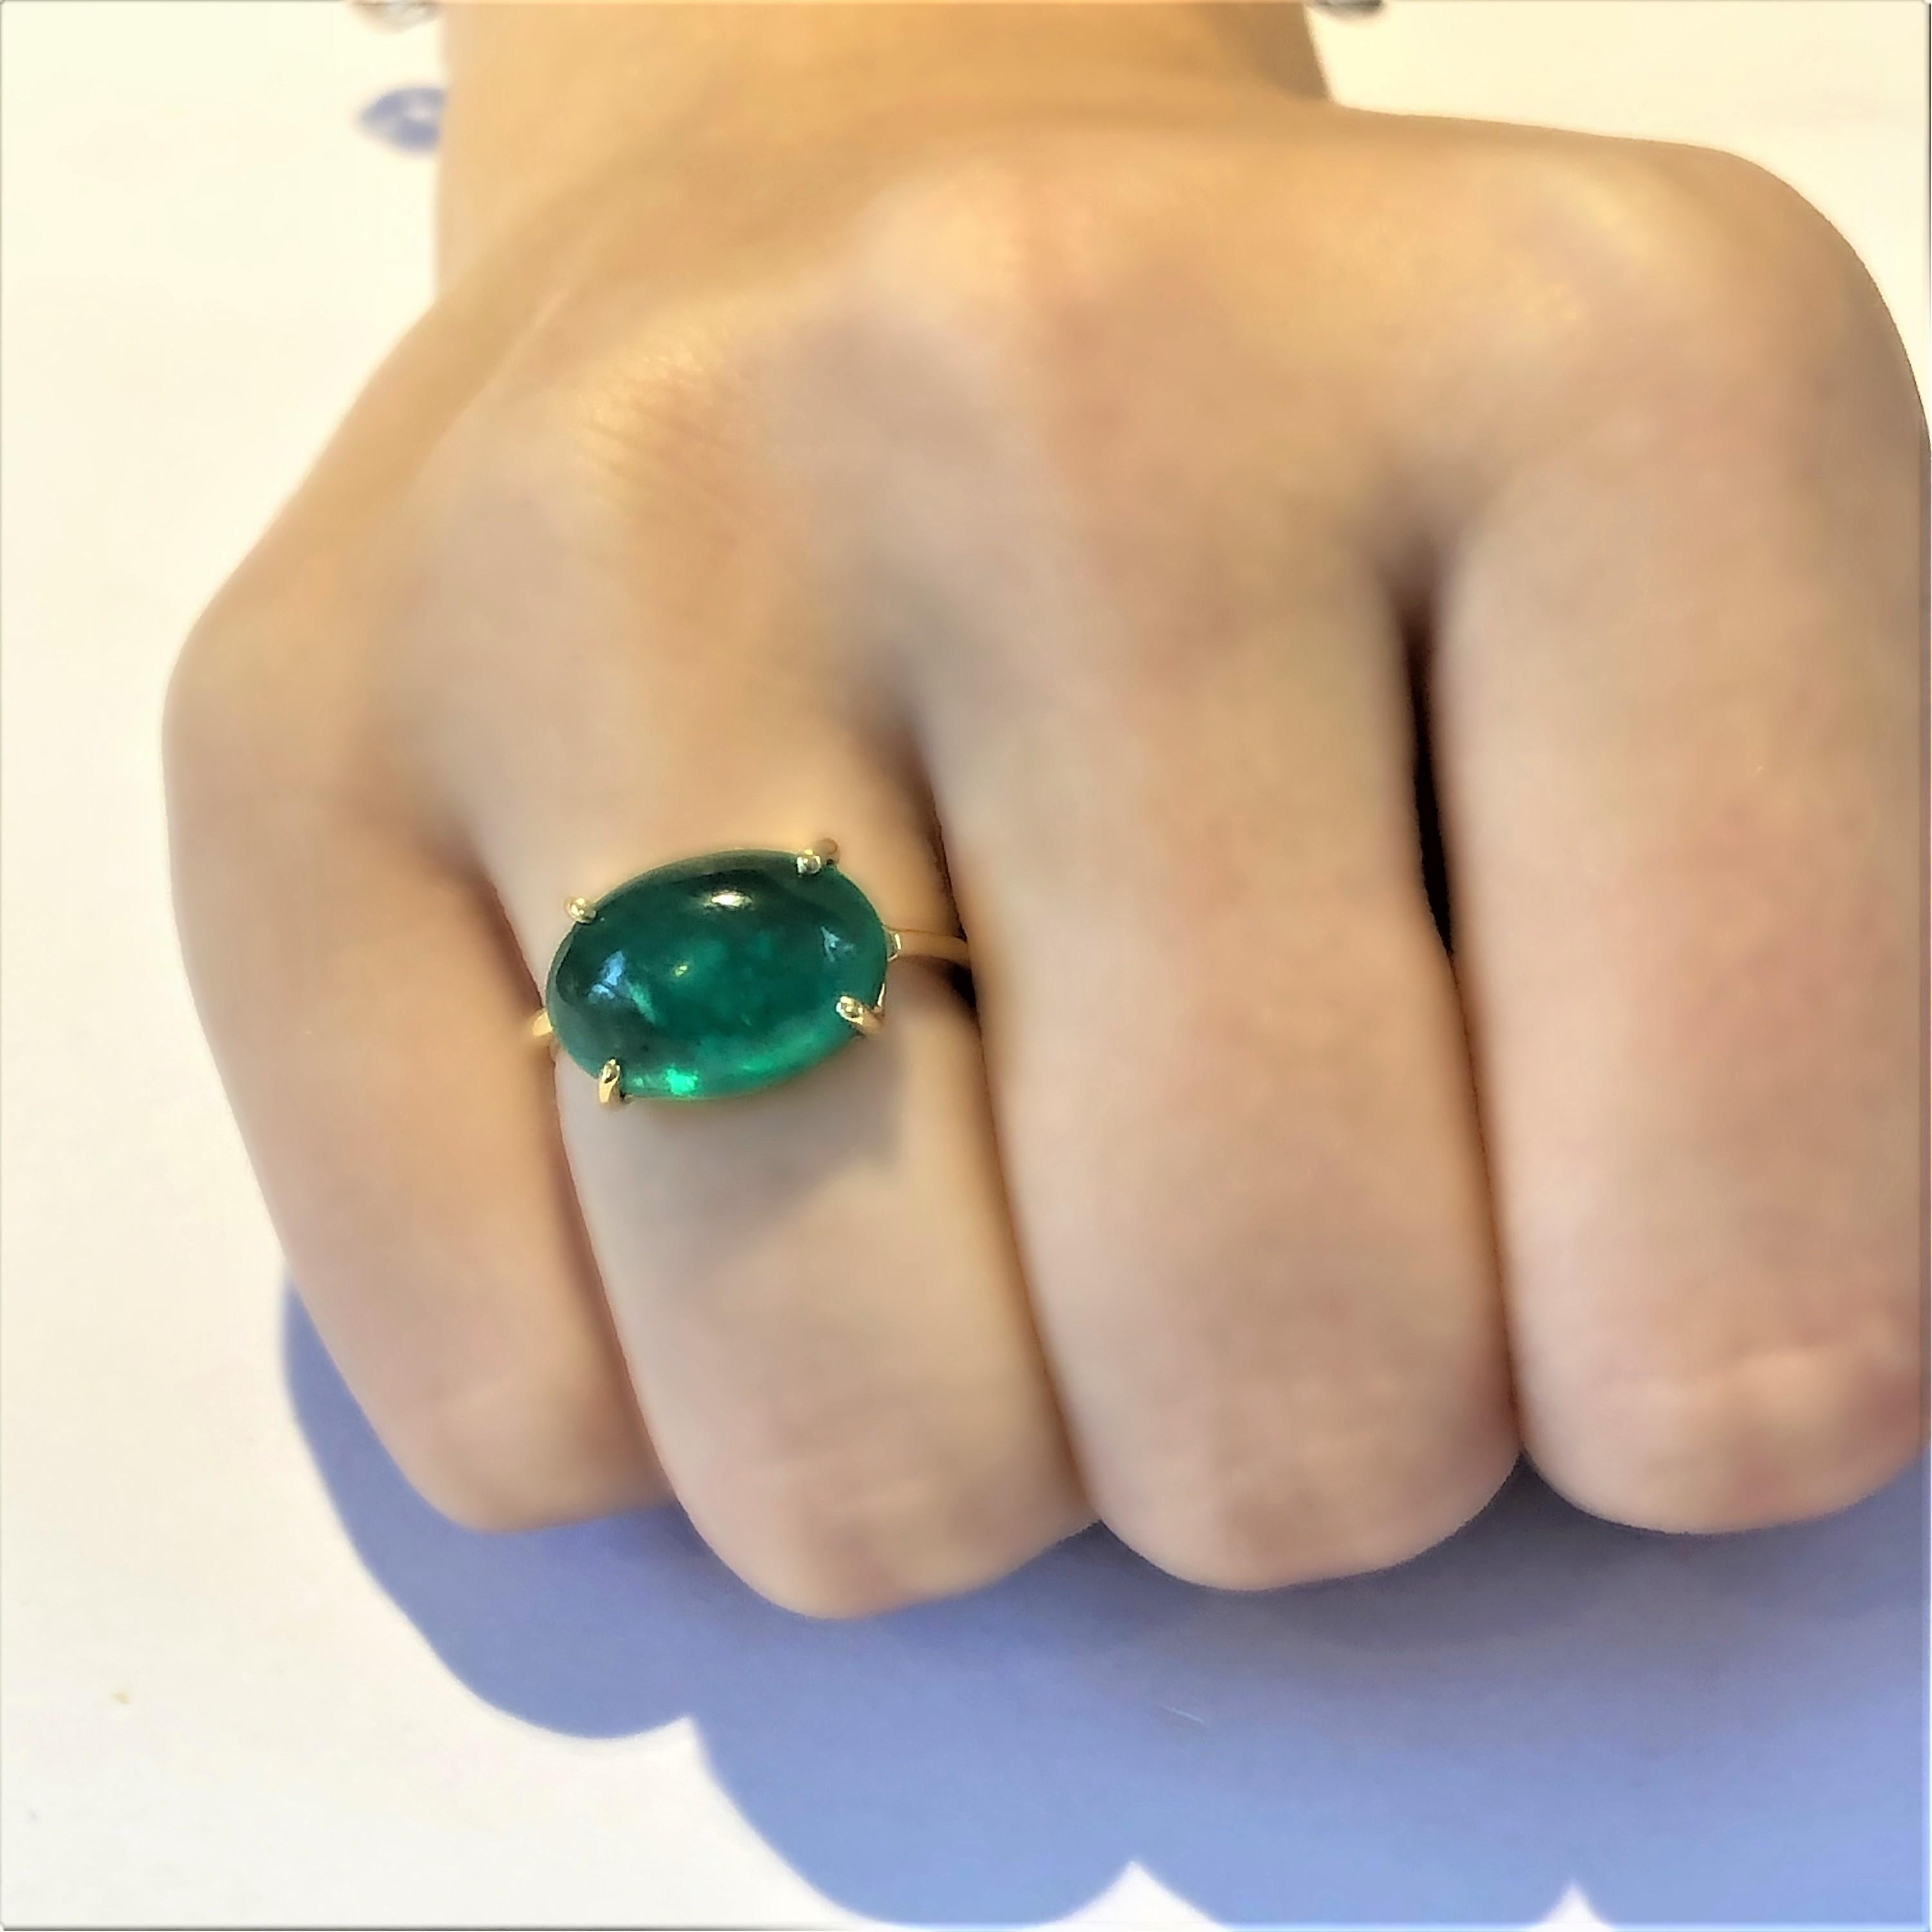 Eighteen Karats yellow gold emerald ring 
Cabochon emerald weighing 6.70 carat       
Emerald measuring 14x12 millimeter                                                        
Ring size 5 In Stock
The ring can be resized 
New Ring
Handmade in the